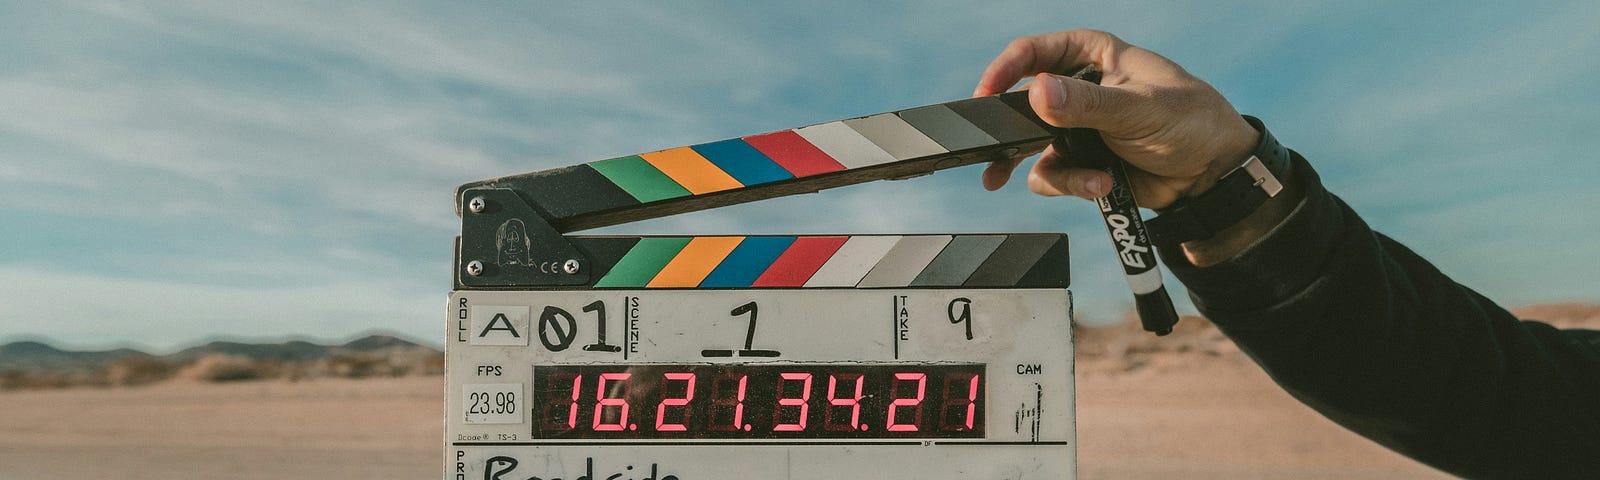 A clapperboard held up in front of flat ground with sand